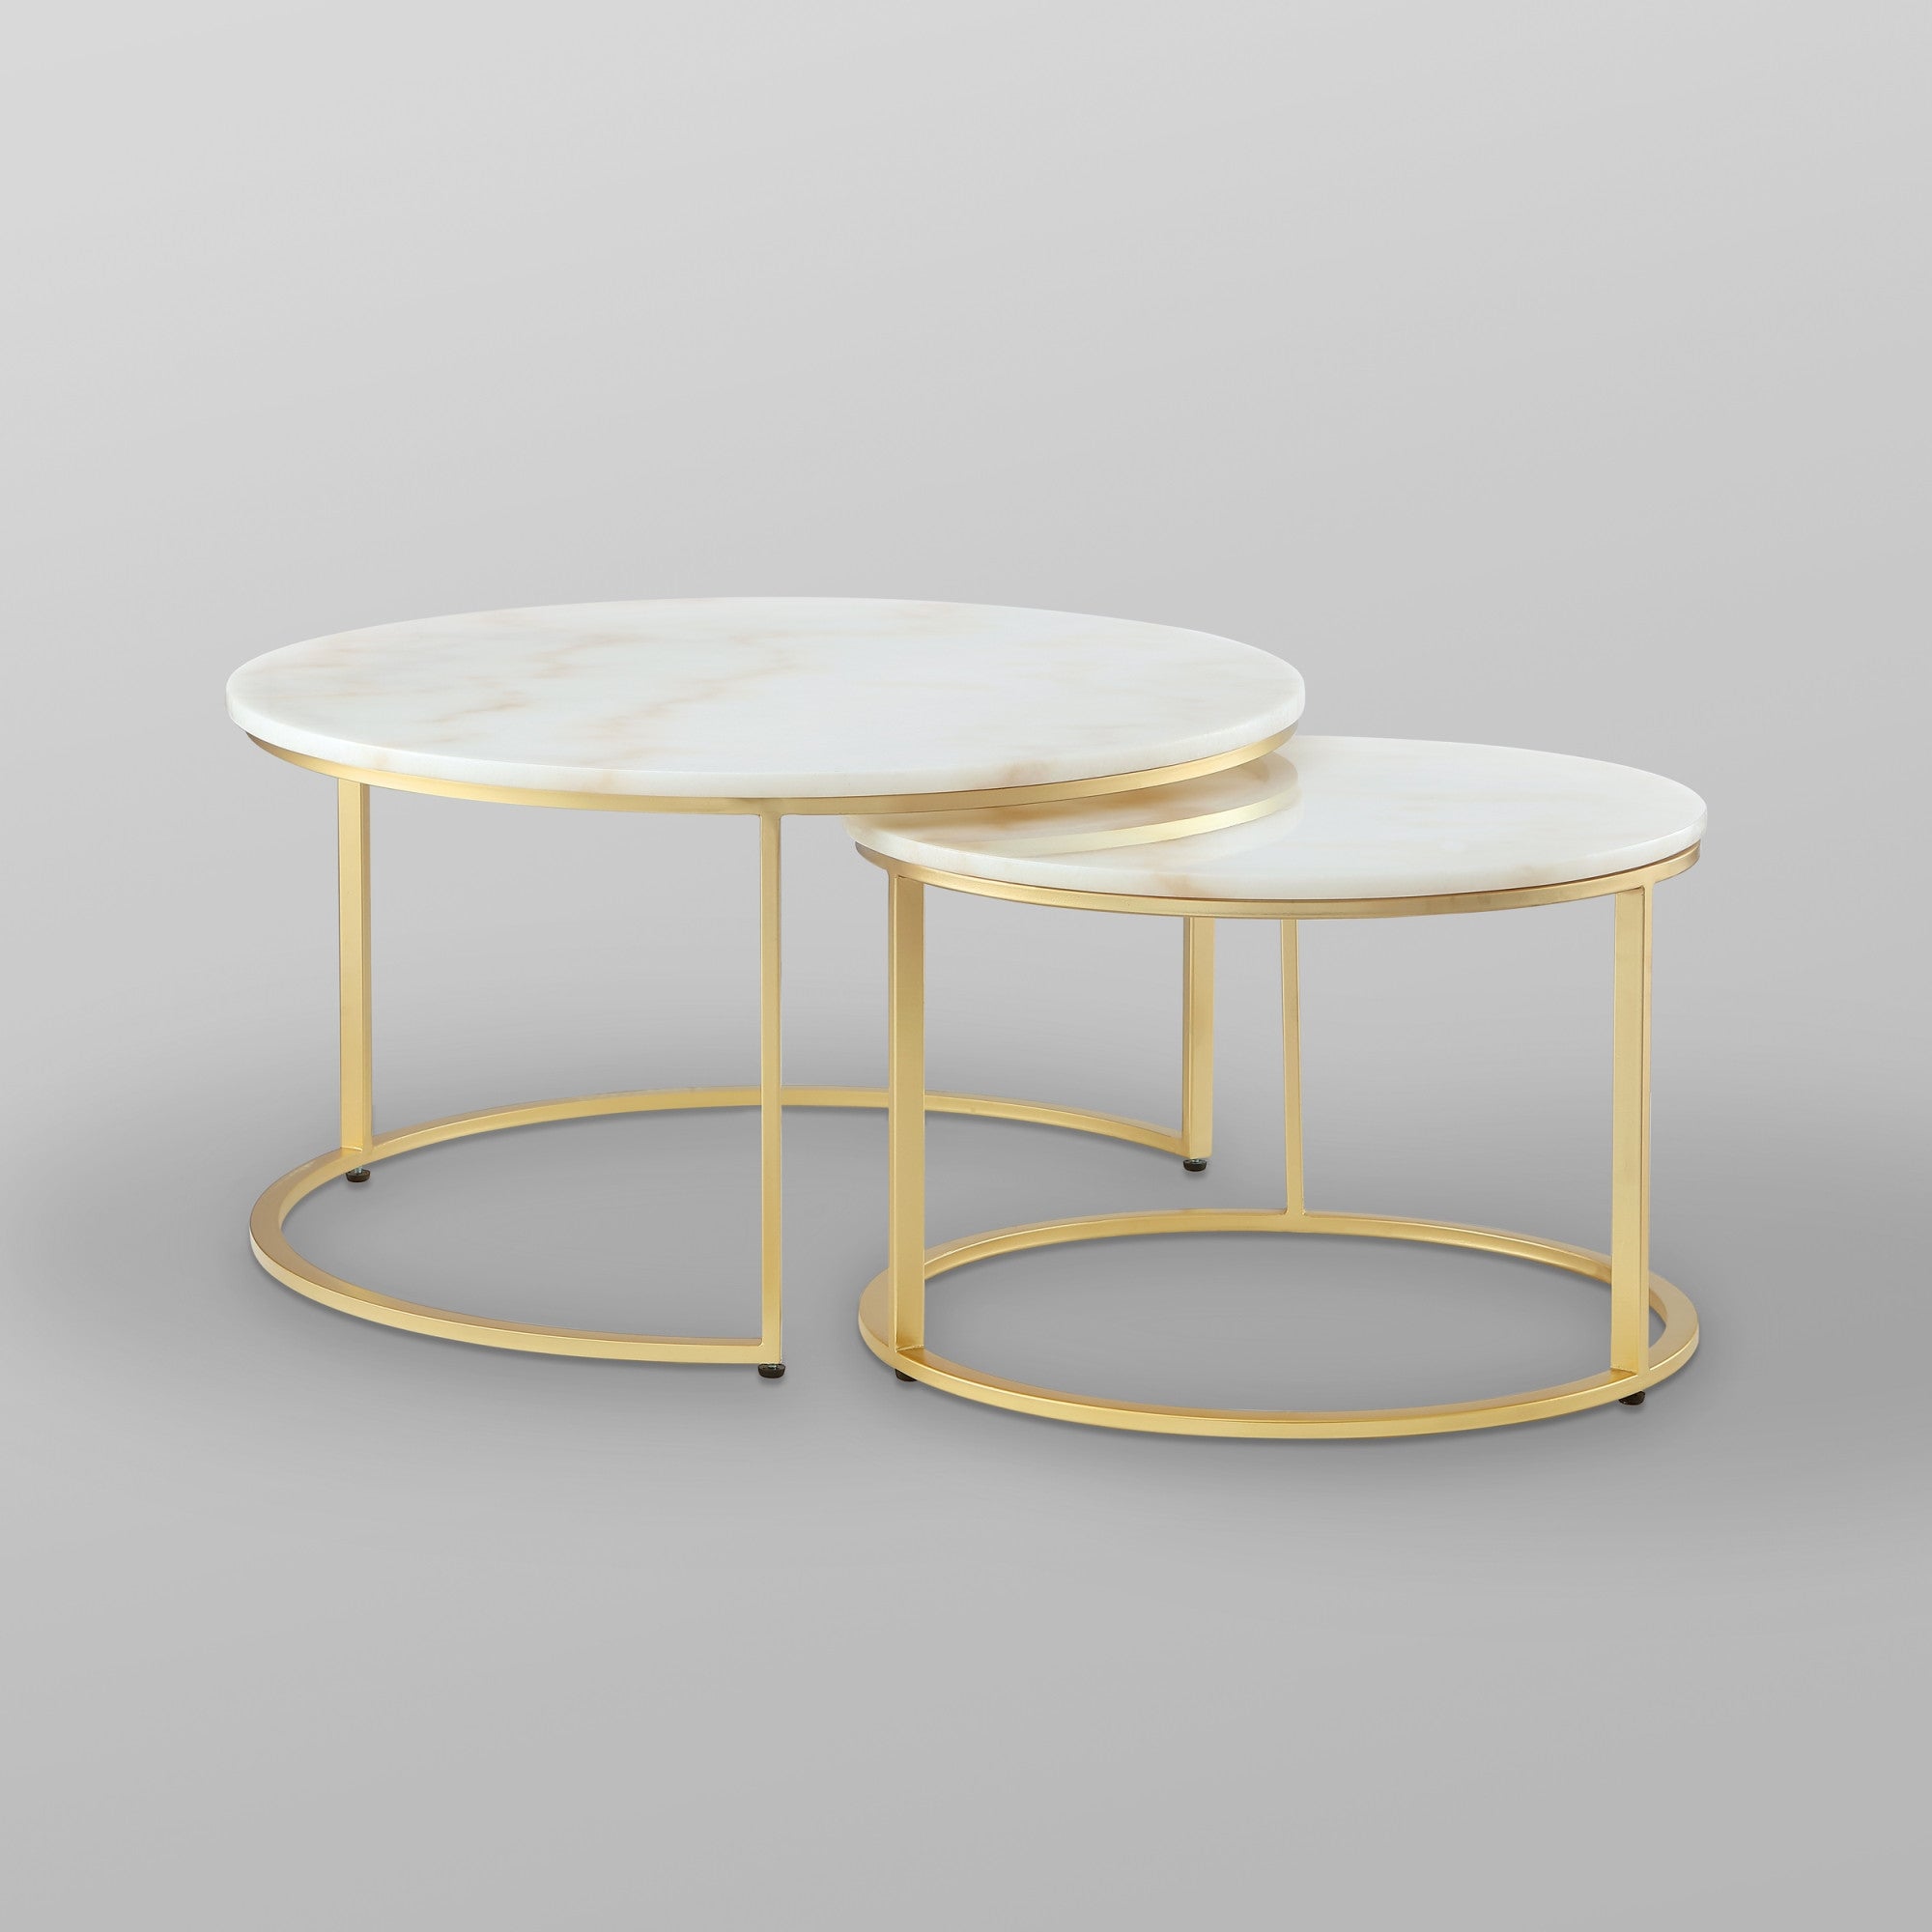 Set of Two 31" White And Gold Genuine Marble And Iron Round Nested Coffee Tables